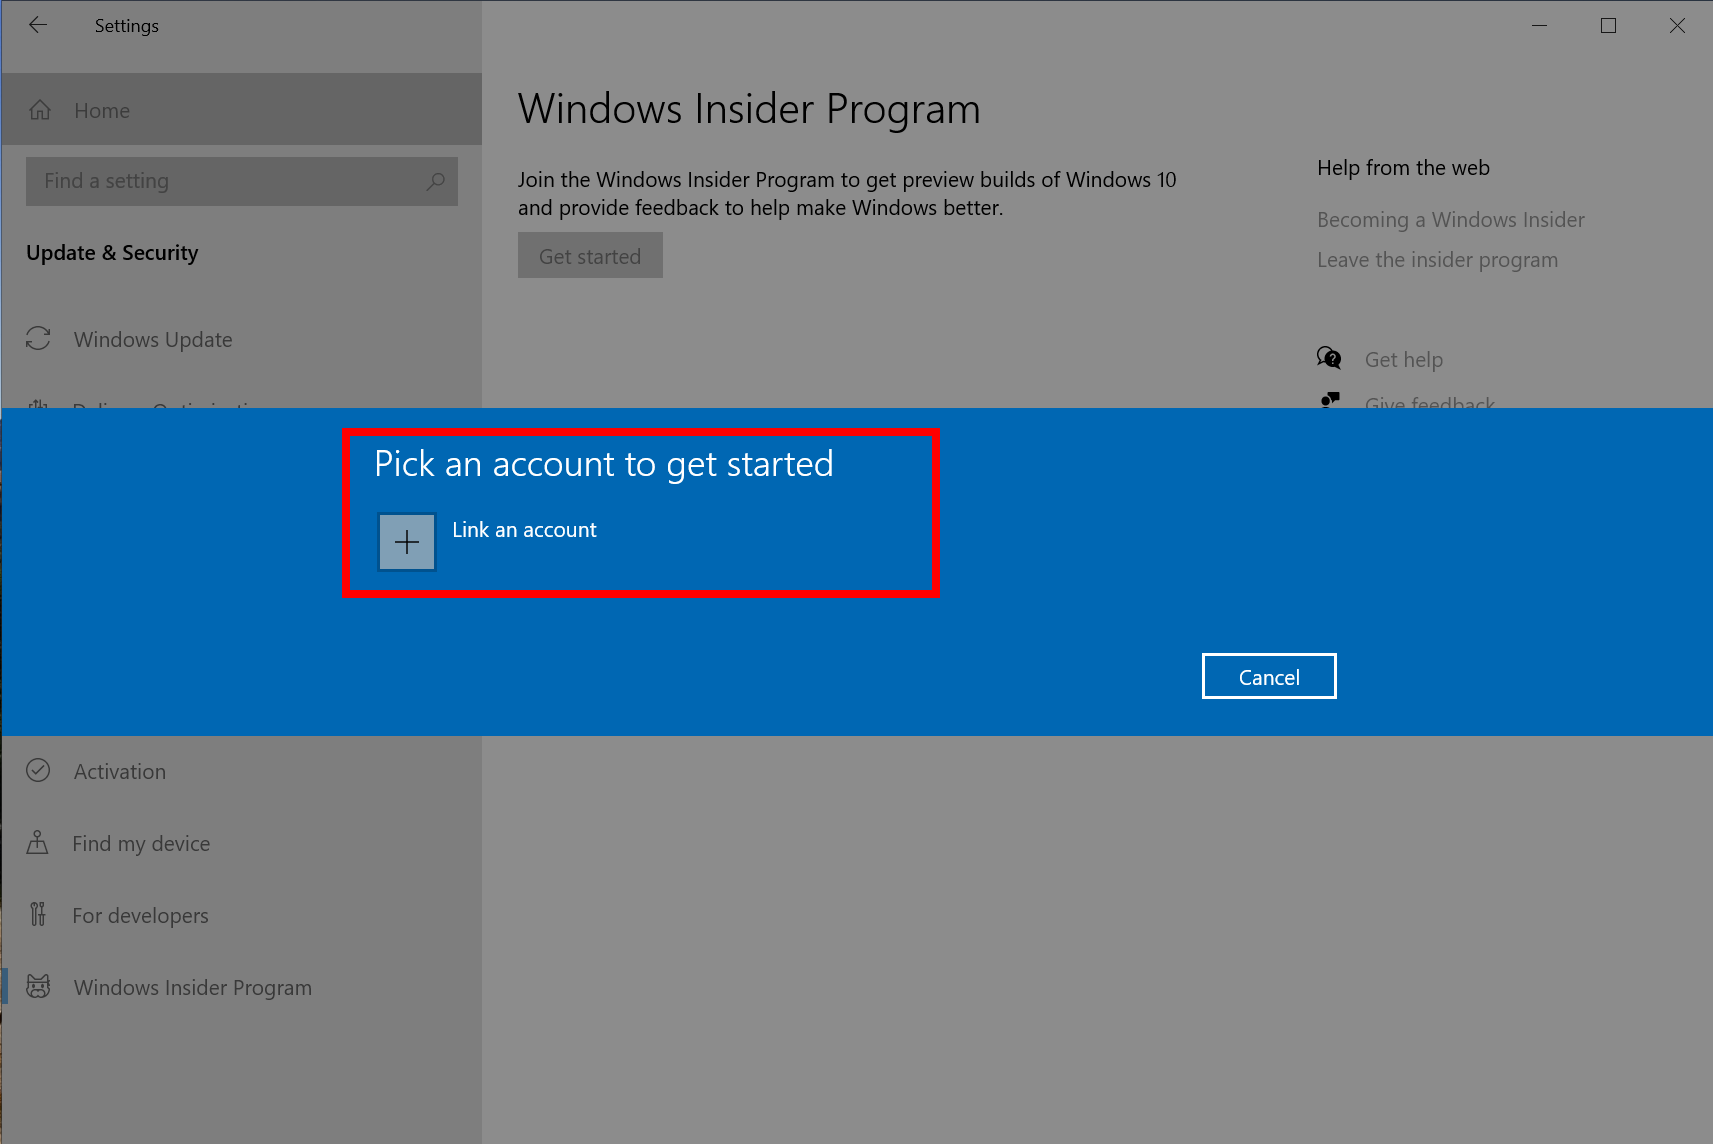 Step 2: Link your Microsoft account or Azure Active Directory account. This is the email account you used to register for the Windows Insider Program.